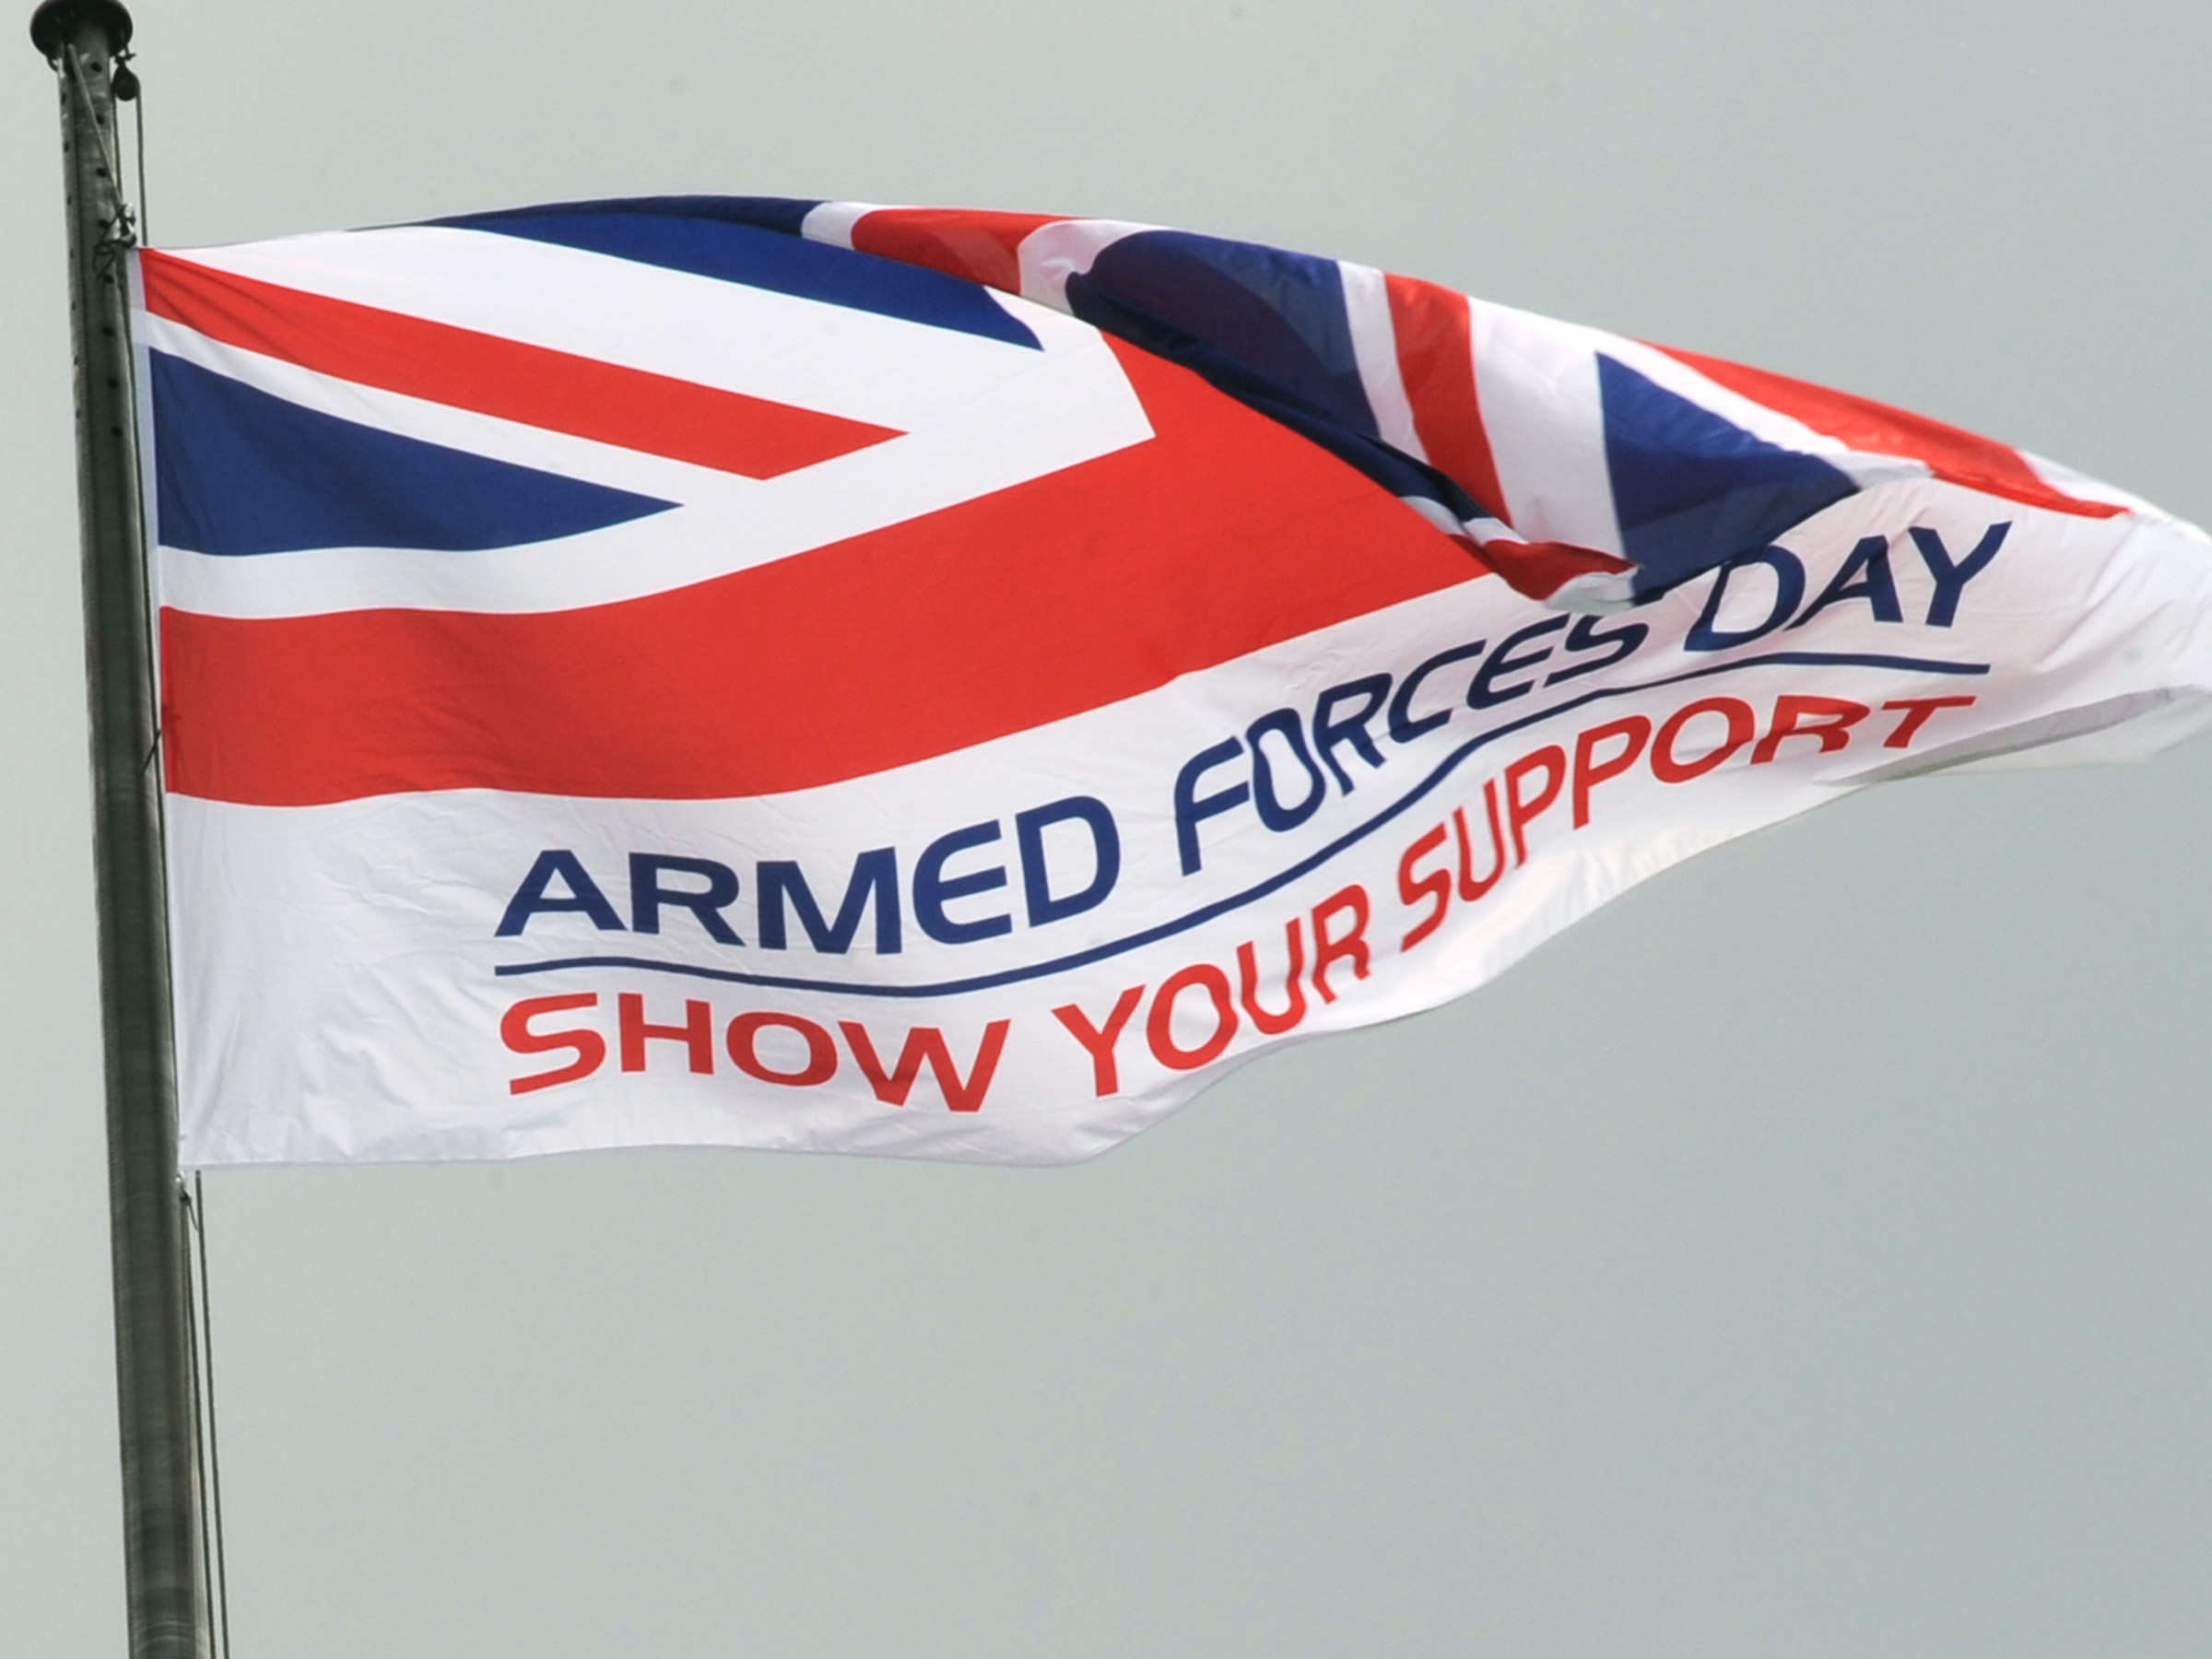 Flag flying atop of a flag pole with text Armed Forces Day Show Your Support on it.